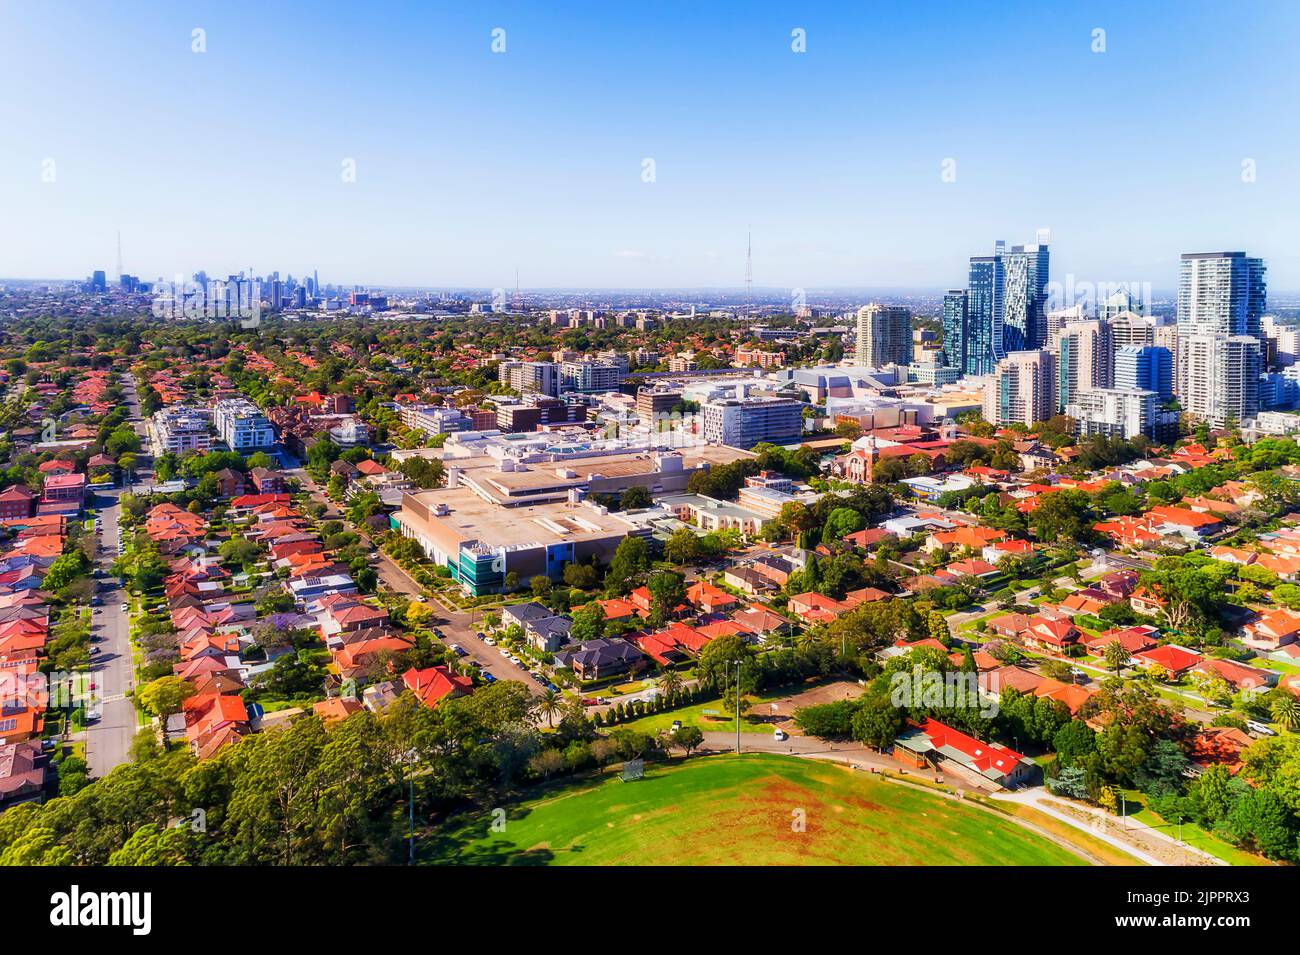 Residential suburbs of Lower North shore in Sydney city - Chatswood business district and local streets in aerial view to CBD. Stock Photo